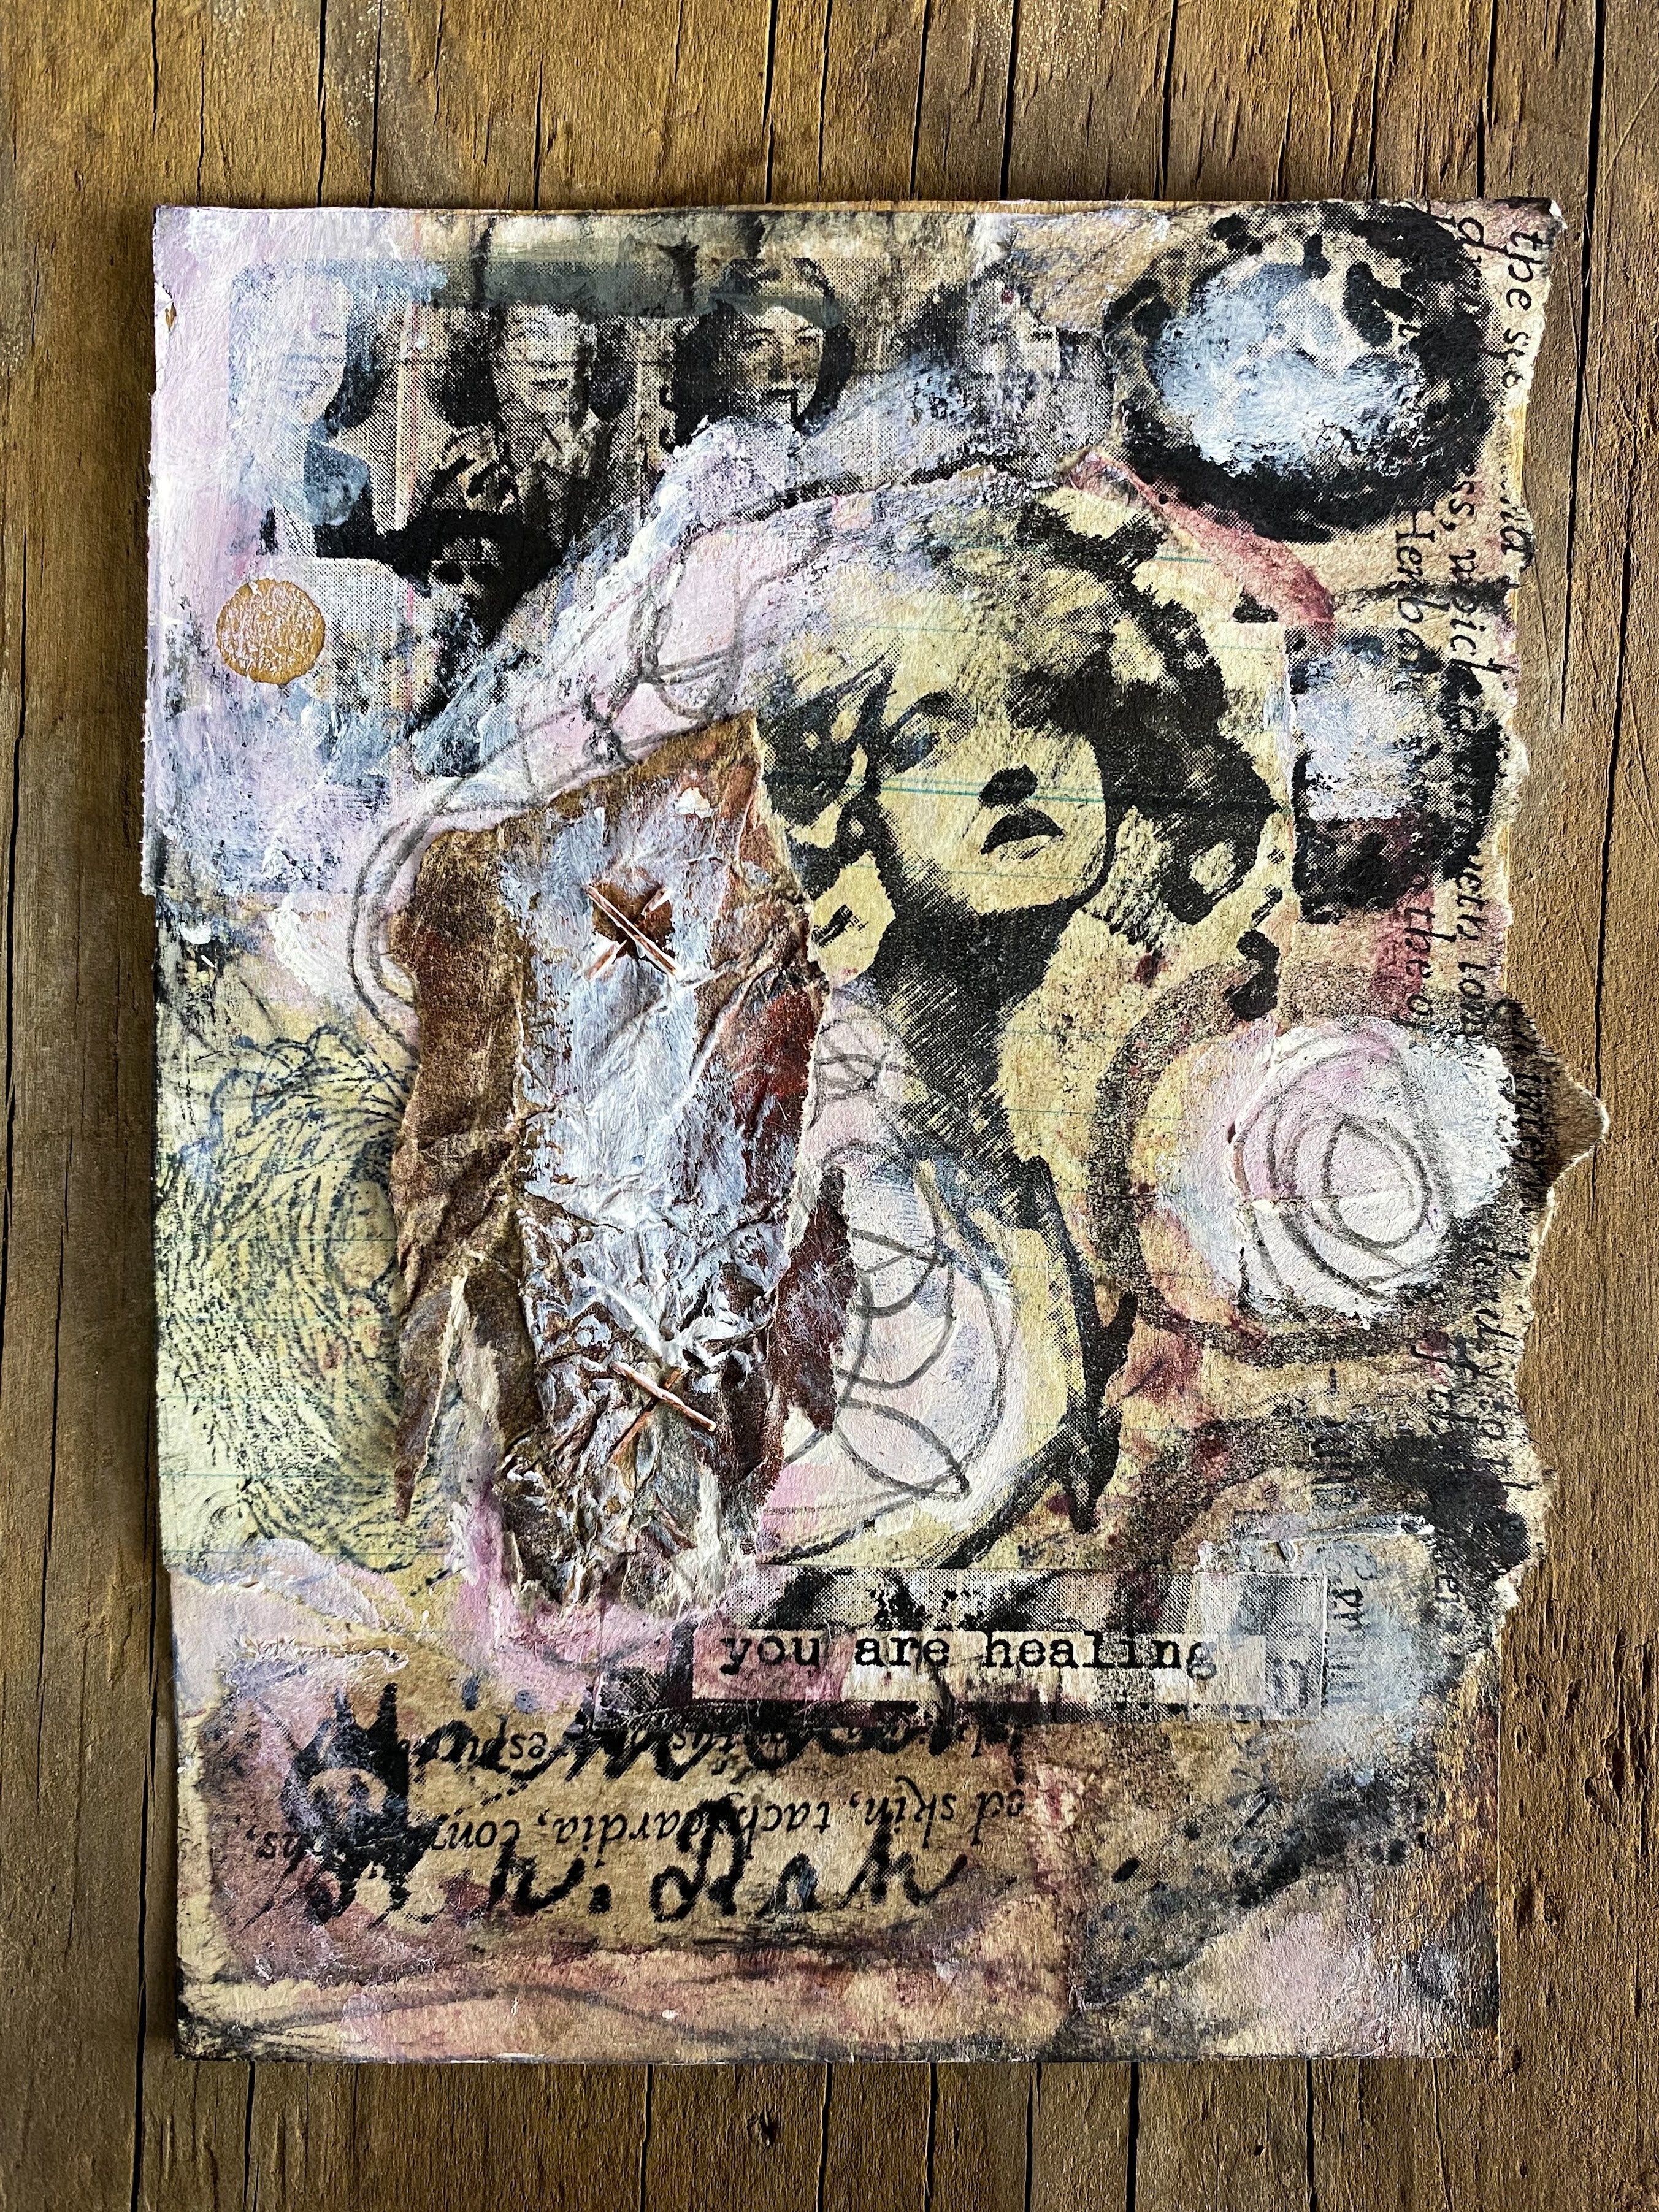 You are Healing- Original Mixed Media Collage